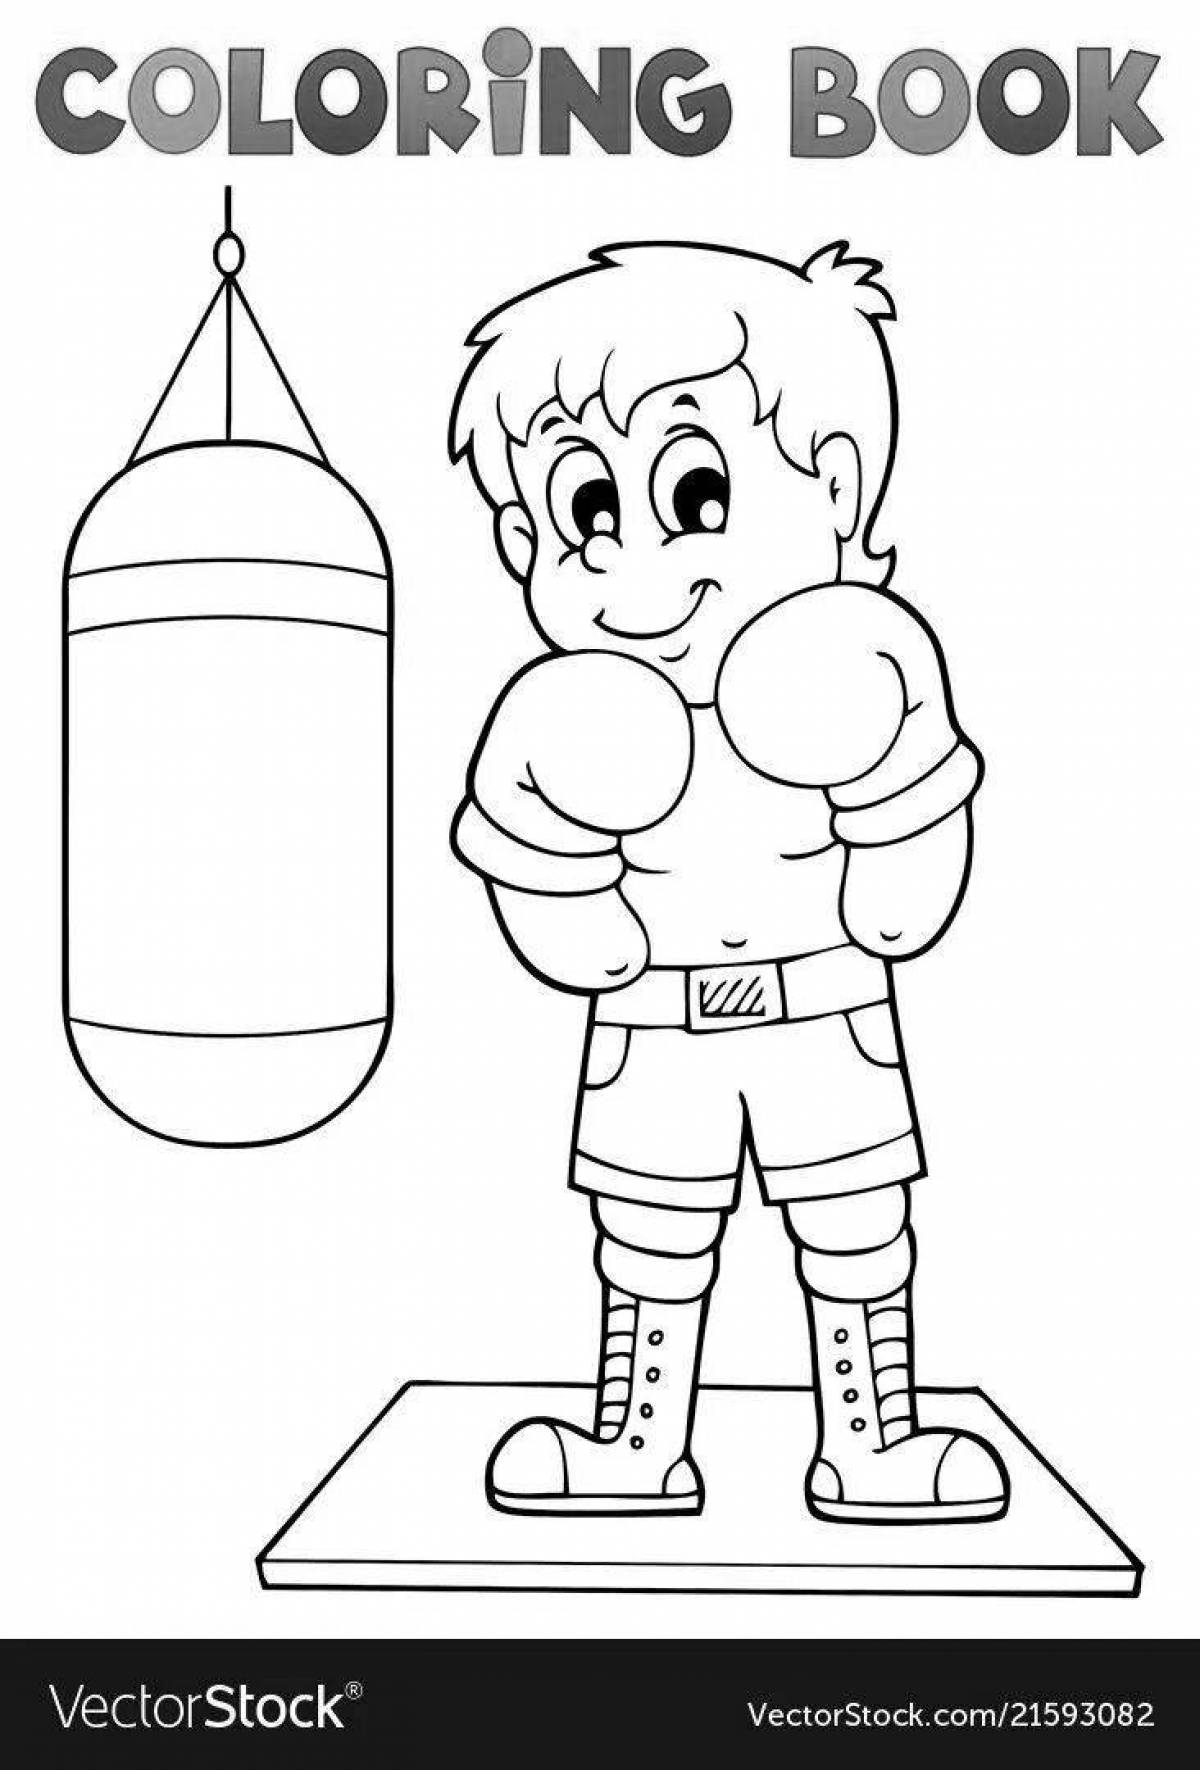 Incredible boxing and boo coloring for kids